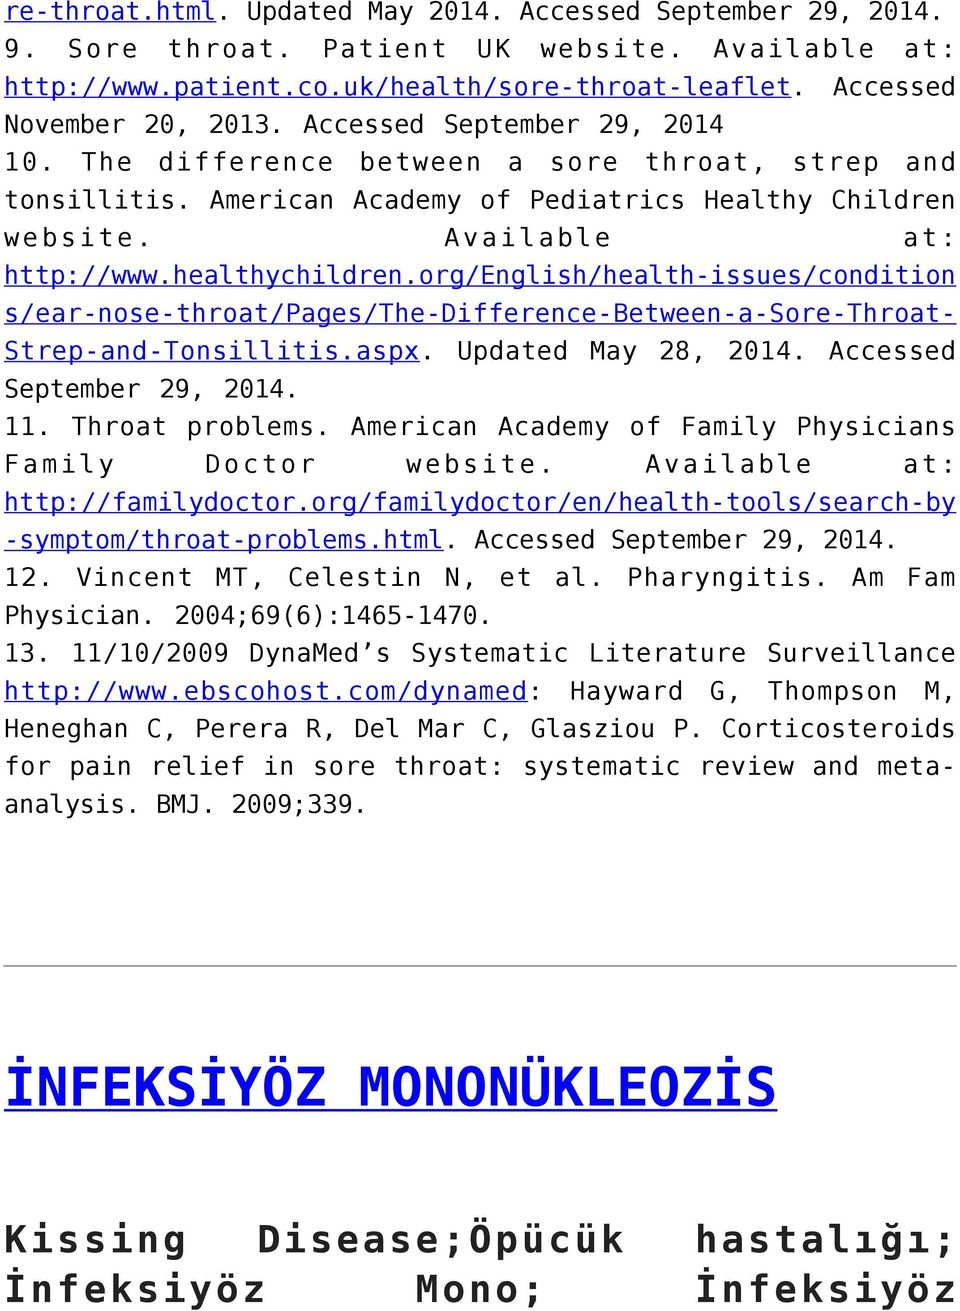 org/english/health-issues/condition s/ear-nose-throat/pages/the-difference-between-a-sore-throat- Strep-and-Tonsillitis.aspx. Updated May 28, 2014. Accessed September 29, 2014. 11. Throat problems.